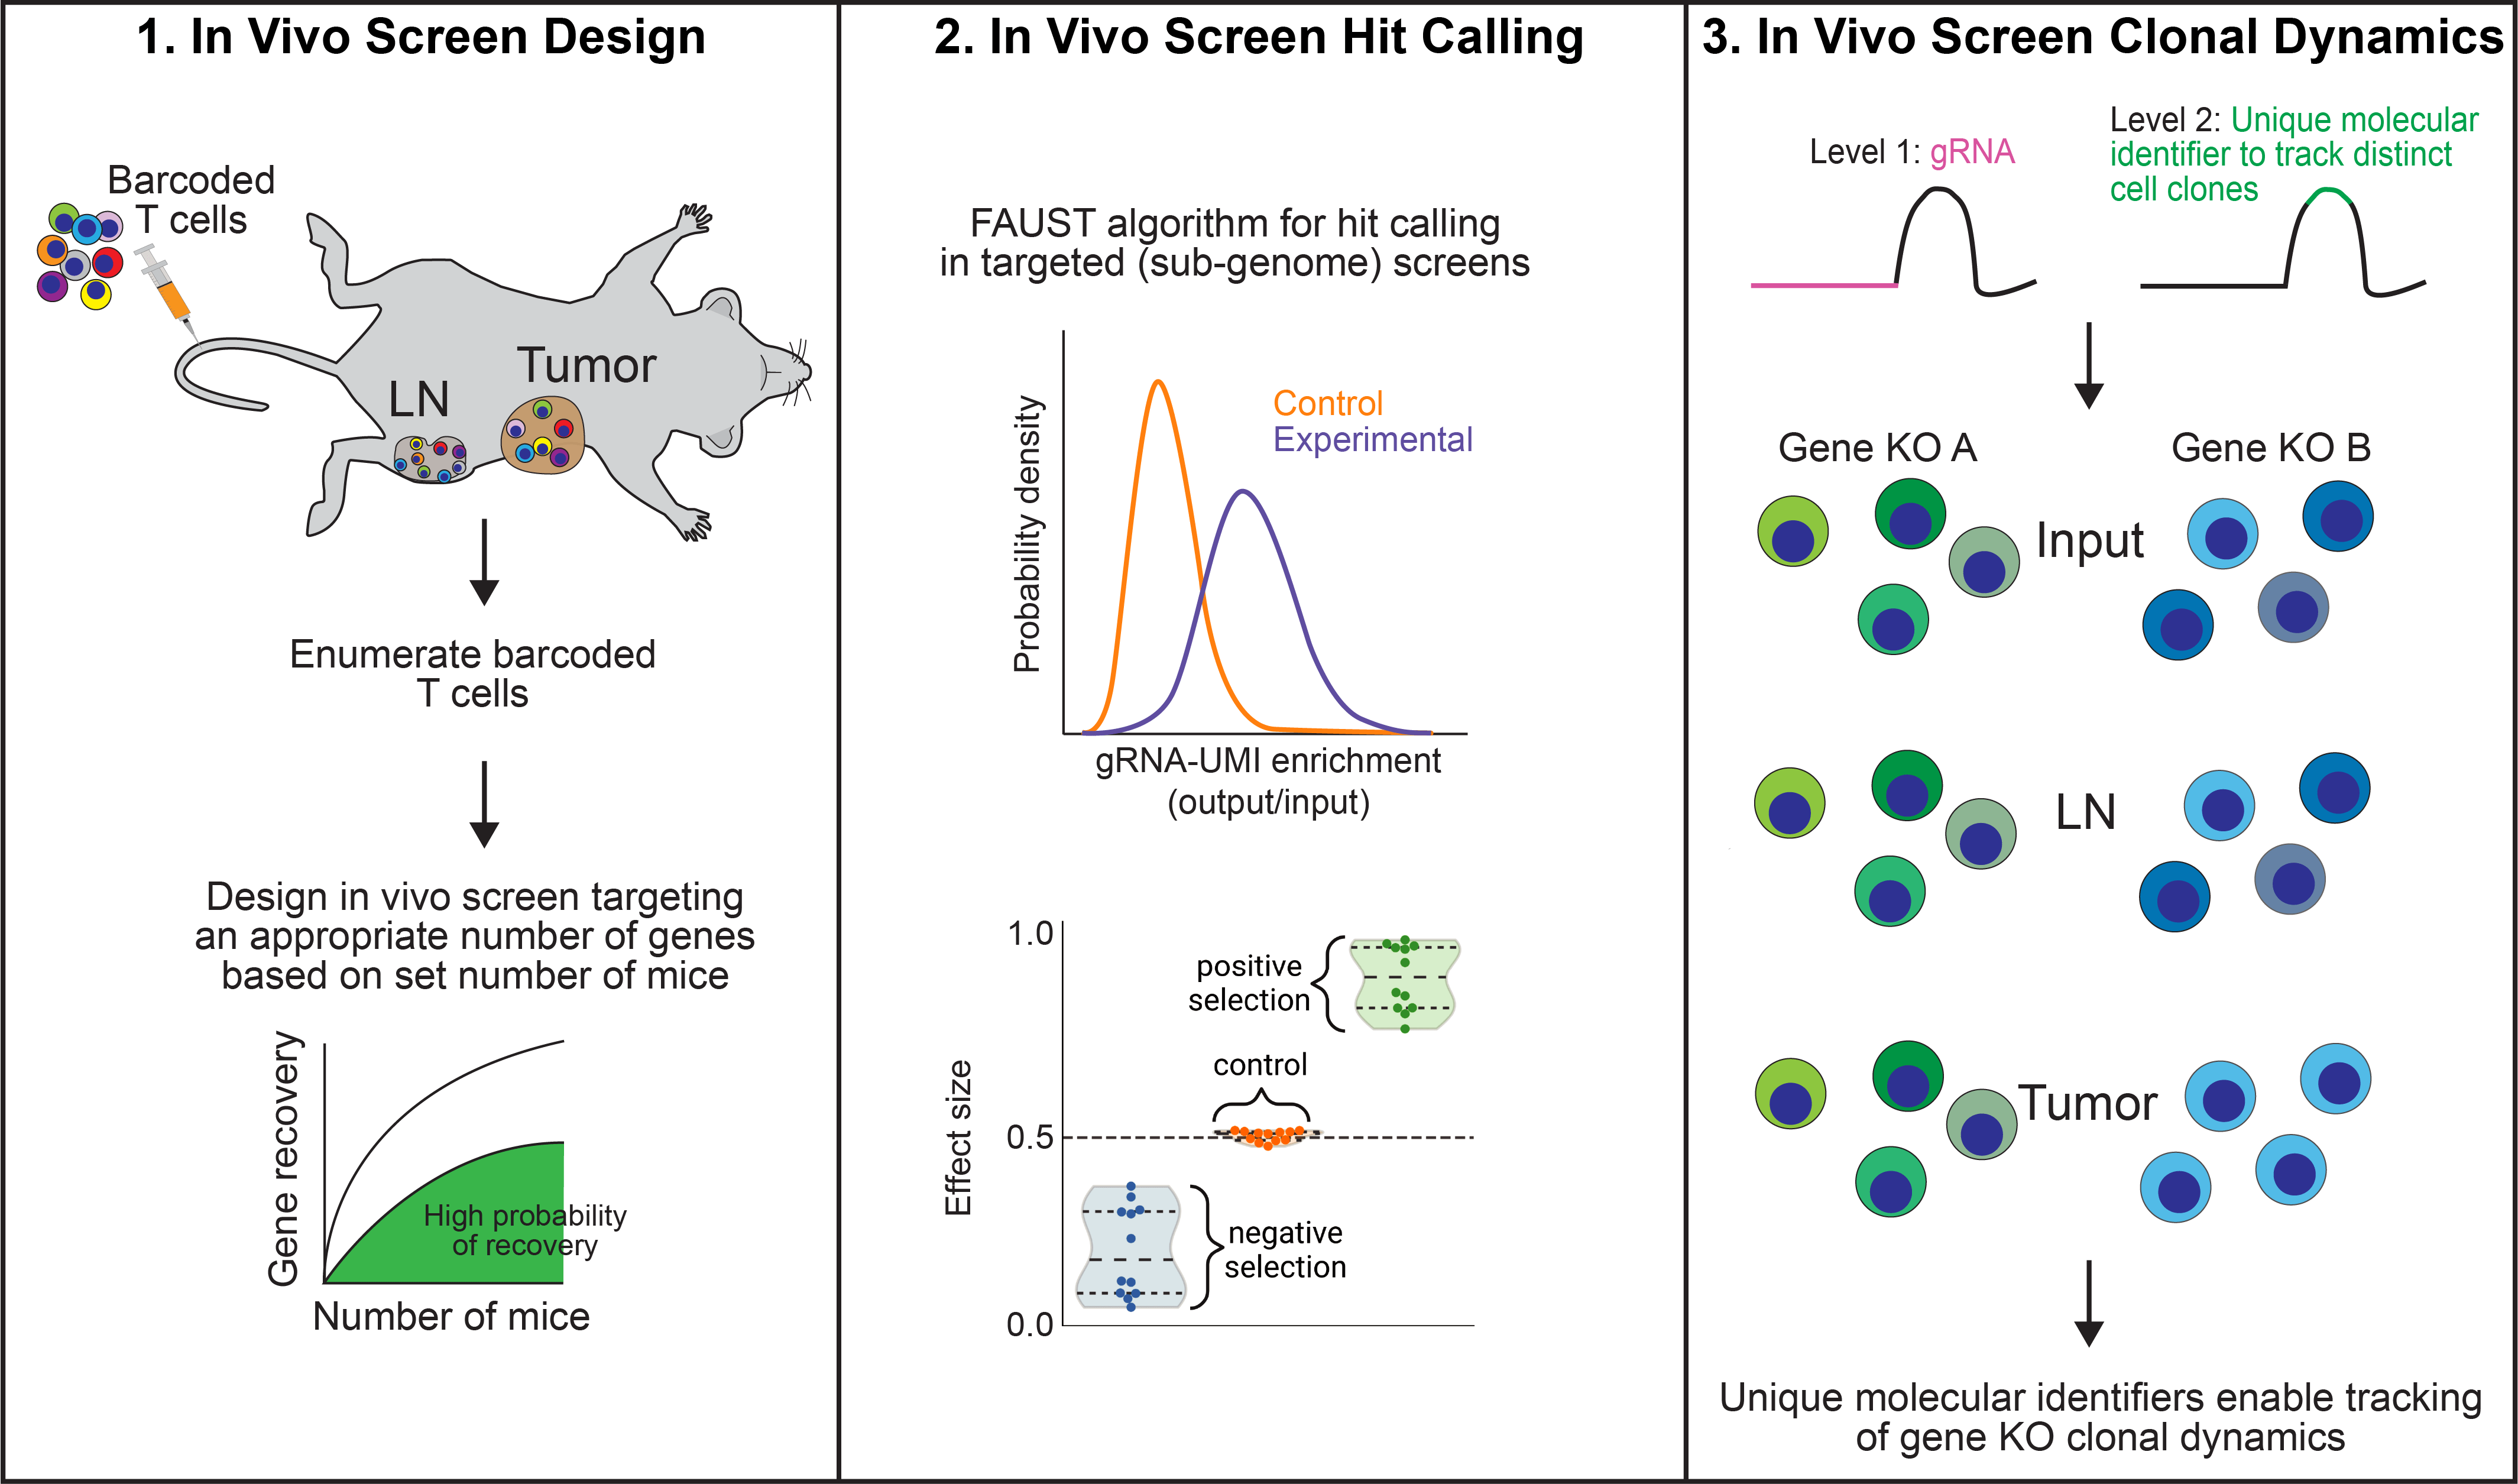 Three panels. The first shows a mouse with lymph nodes and a tumor being injected with barcoded T cells, which are then enumerated and used to design an in vivo screen targeting an appropriate number of genes based on the set number of mice. The second panel shows in vivo screen hit calling using the FAUST algorithm in targeted (subgenome) screens. The third panel shows in vivo screen clonal dynamics, with Level 1 being gRNA and Level 2 being unique molecular identifier to track distinct cell clones, leading to unique molecular identifiers added to cells with Gene A or B knocked out, enabling tracking of gene KO clonal dynamics in lymph nodes and tumor cells.